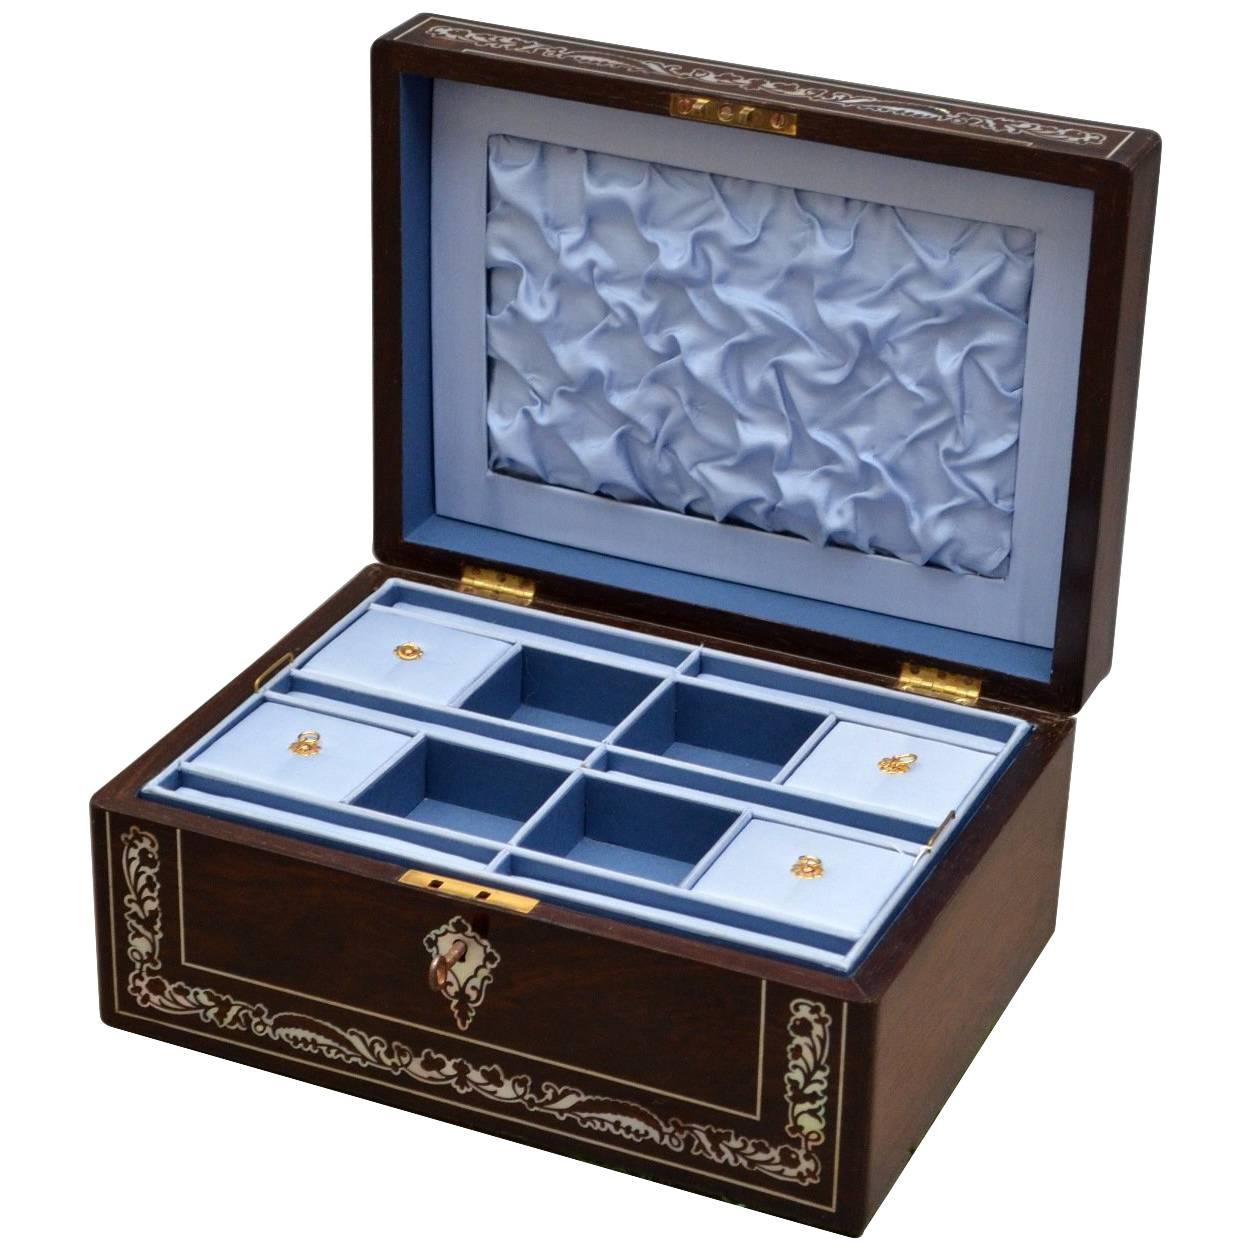 Regency Mother-of-Pearl Inlaid Jewelry Box